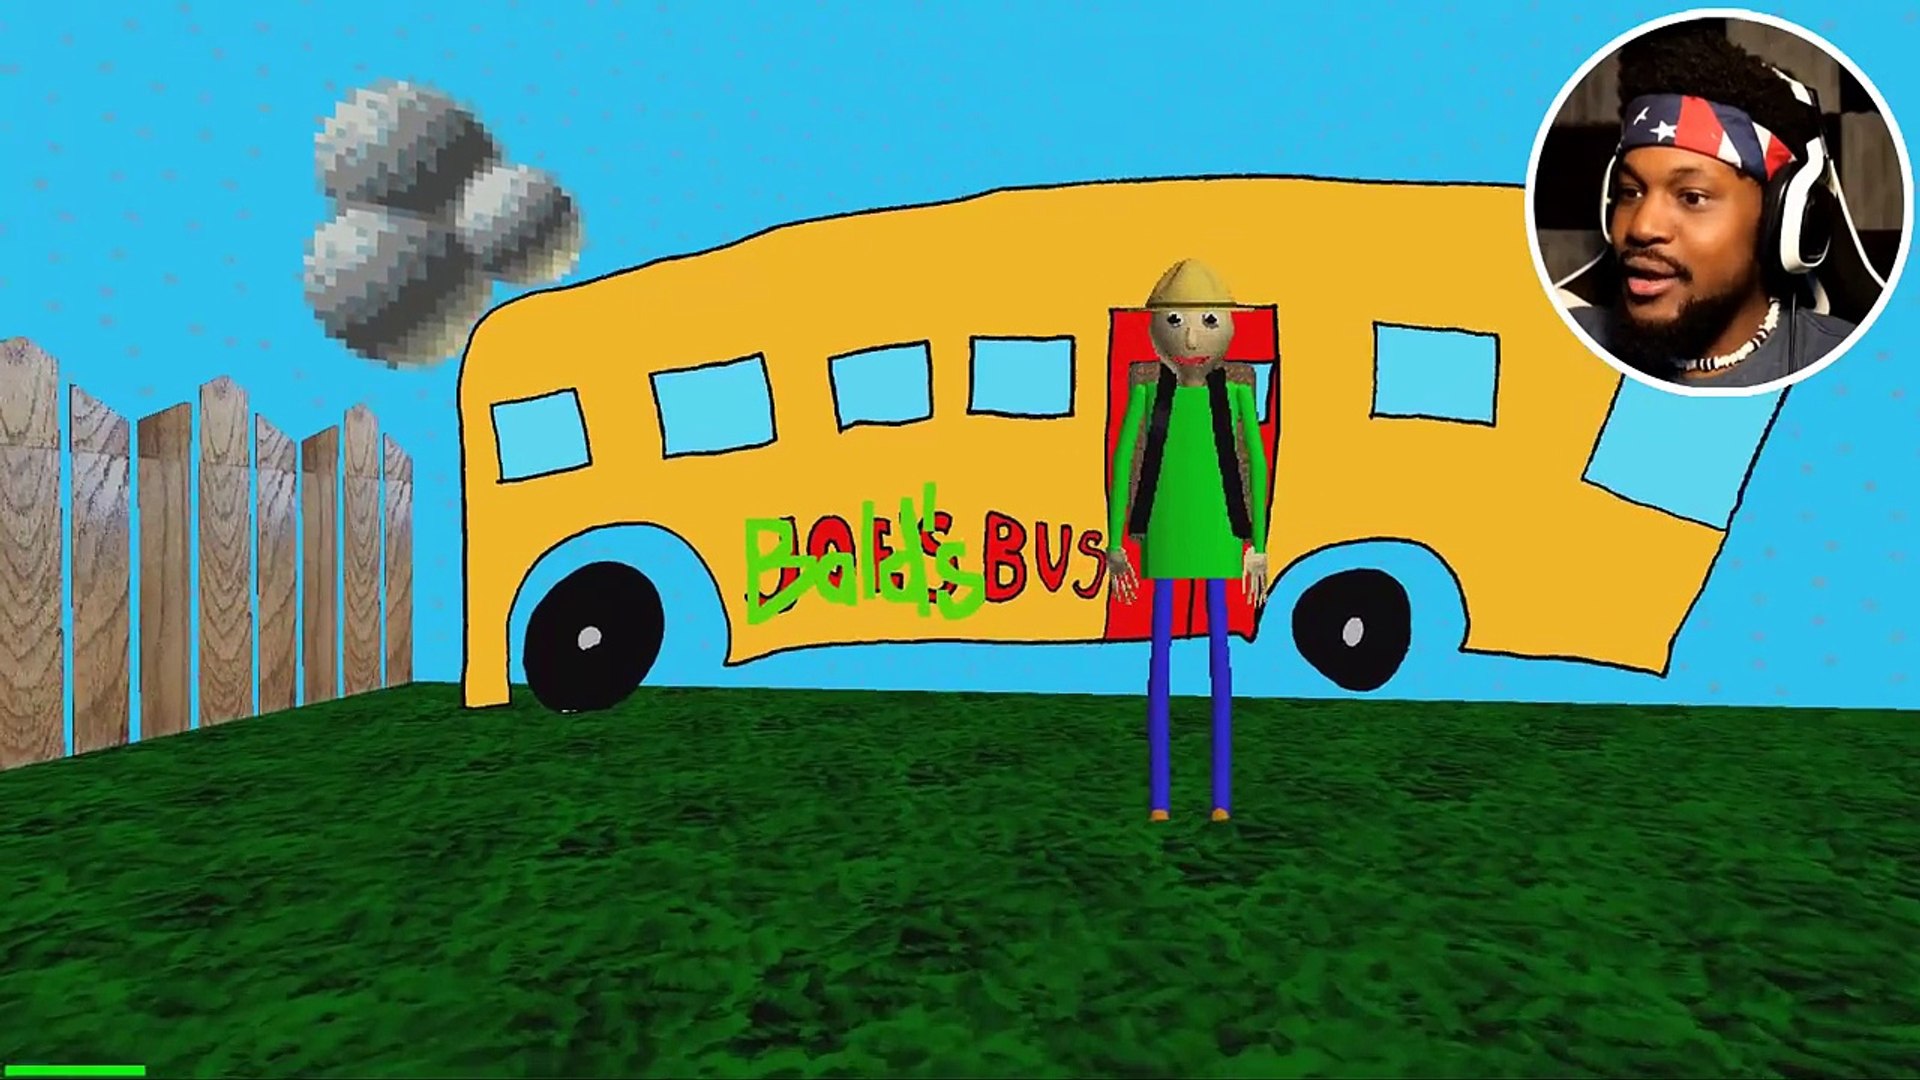 Do Not Get On The Bus Baldi S Camping Field Trip Demo - baldi s basics field trip camping demo roblox